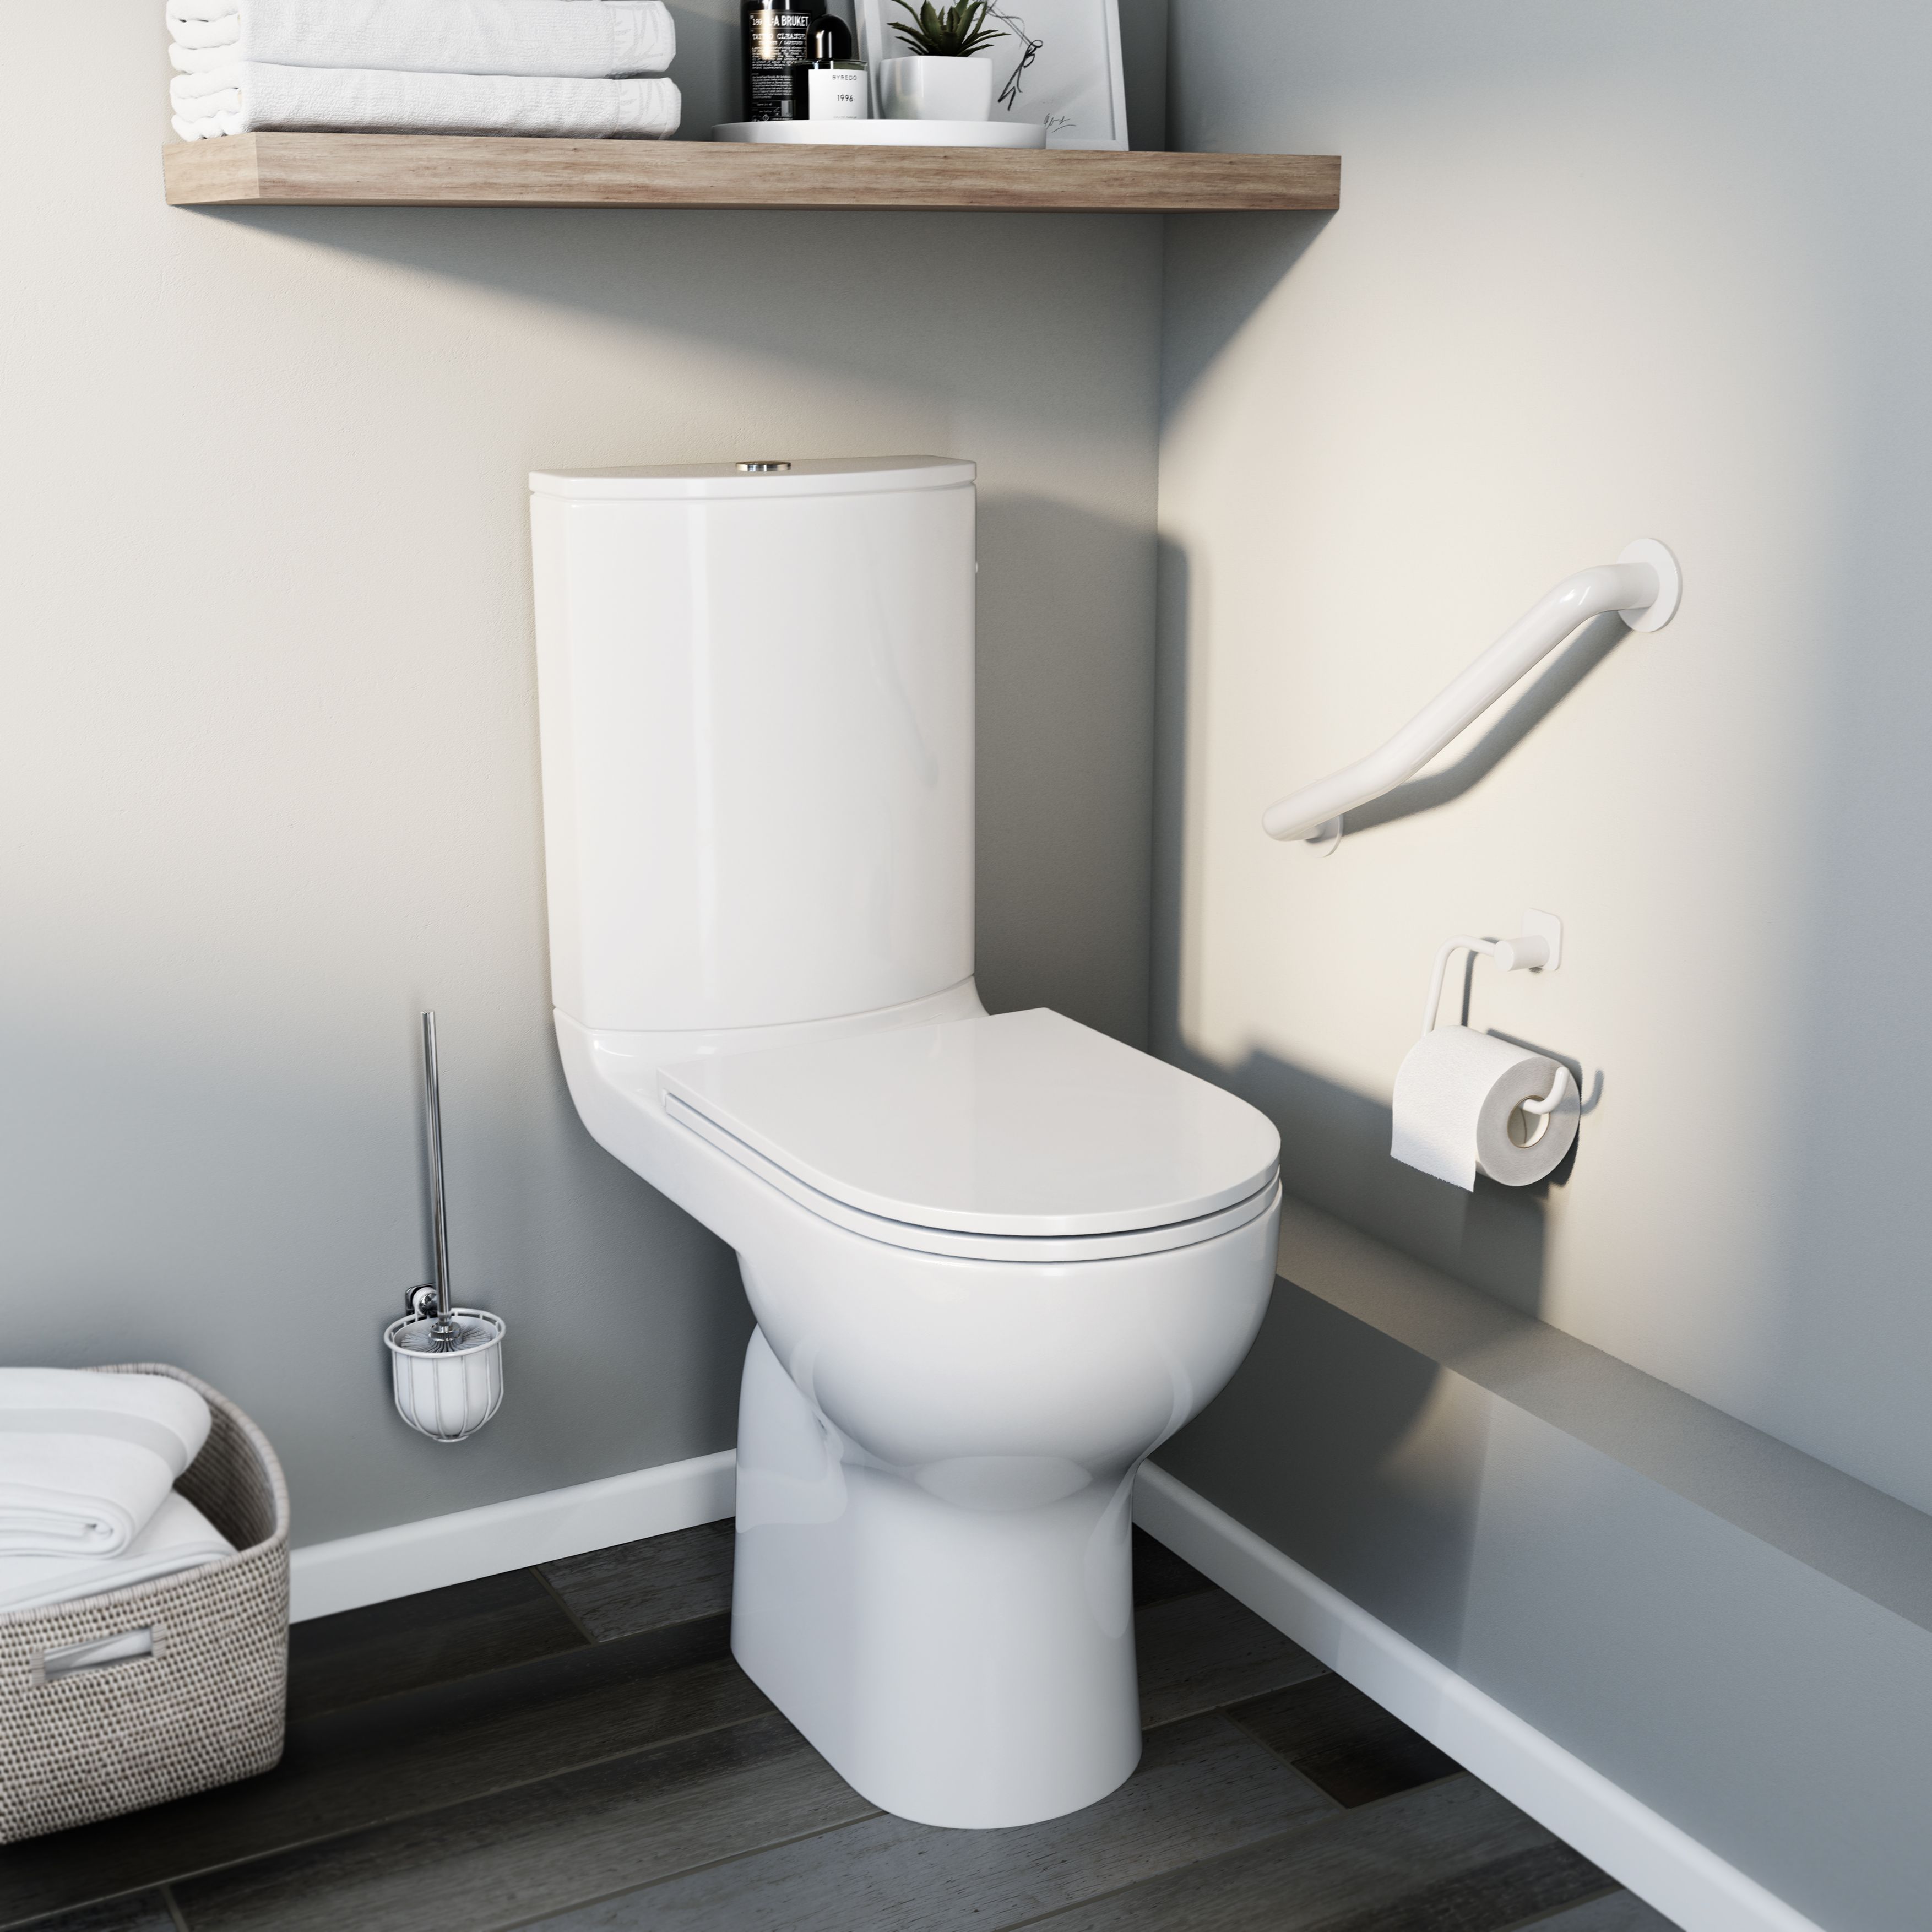 GoodHome Cavally White Close-coupled Comfort height Toilet set with Soft close seat